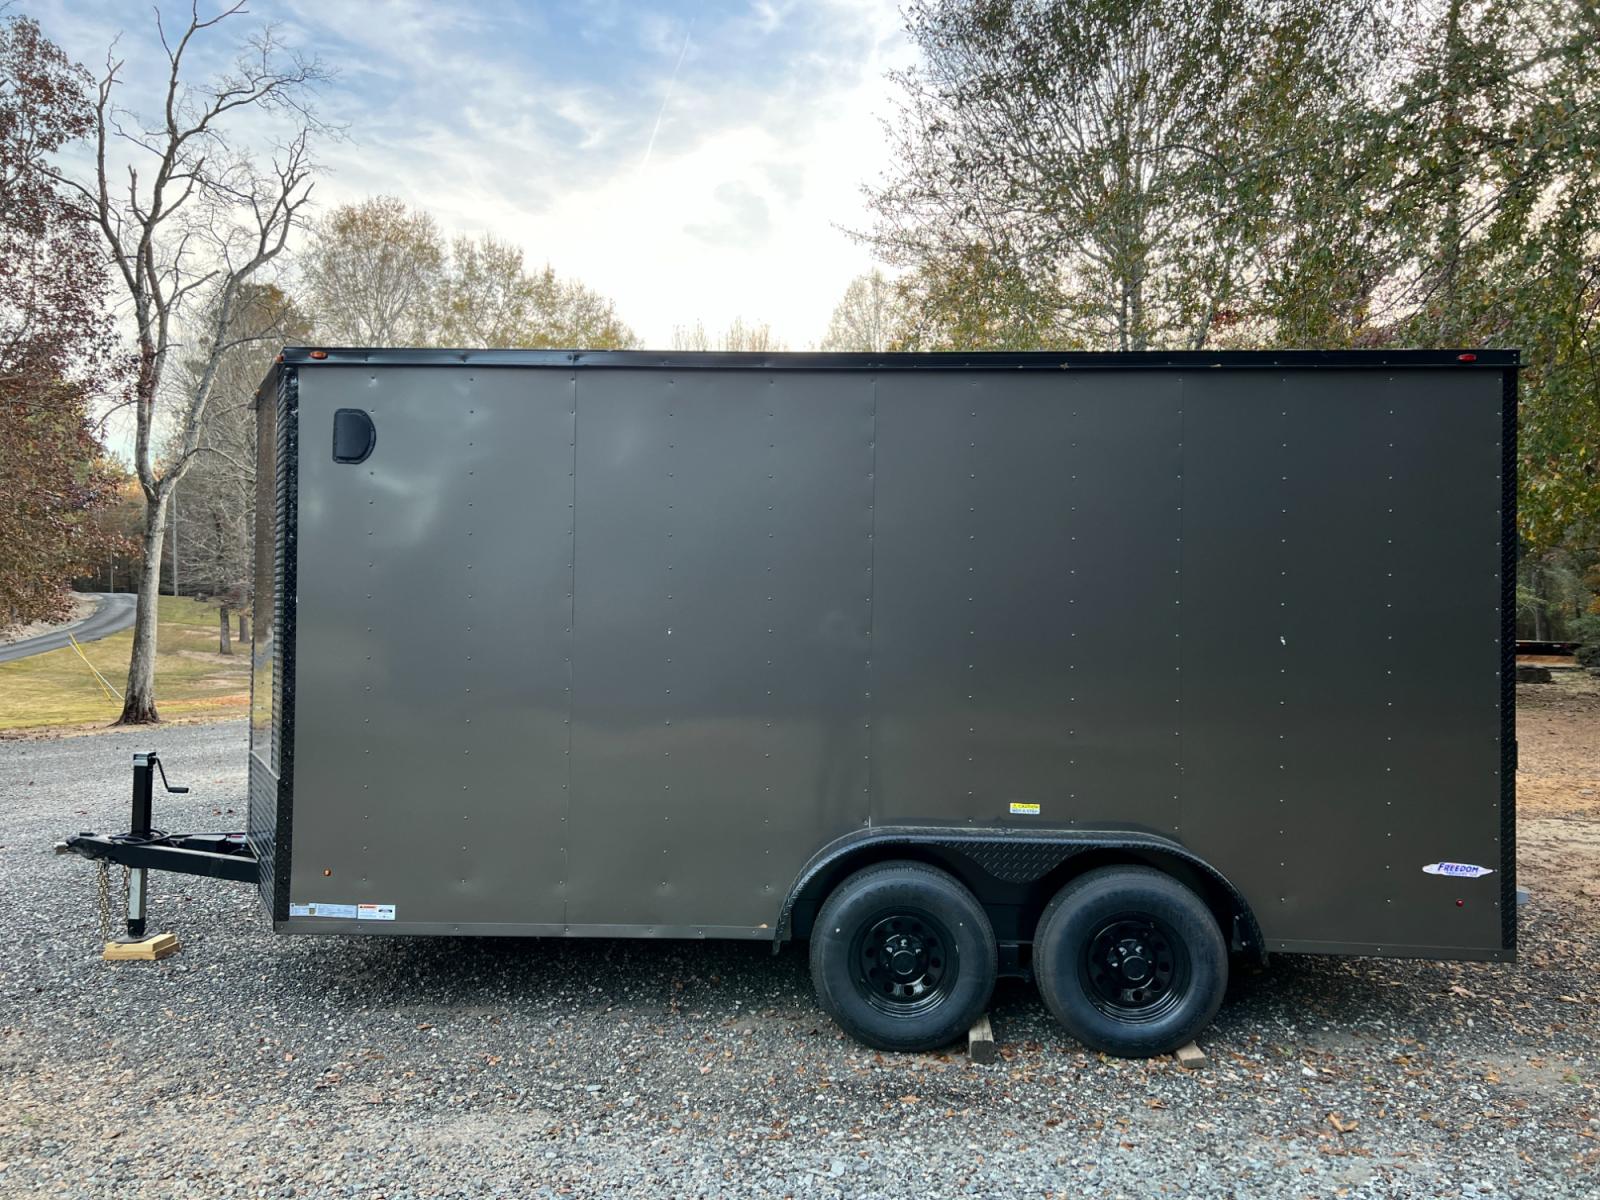 2023 .080 Charcoal Elite Cargo 7ft X 16ft Tandem 5K lb Axles! , located at 1330 Rainey Rd., Macon, 31220, (478) 960-1044, 32.845638, -83.778687 - Brand New 2023 "Top of the Line" Elite Cargo Trailer, Made in South Ga. Awesome 7ft X 16ft Tandem Enclosed Cycle Hauler & Cargo Trailer! Taller Inside Height is 7ft 6" Tall Inside & the Ramp Door Clearance is 7ft, at the Back Door! Up-Graded Larger 5k lb Dexter Brake Axles! Larger 225/75/15" 10 - Photo #4